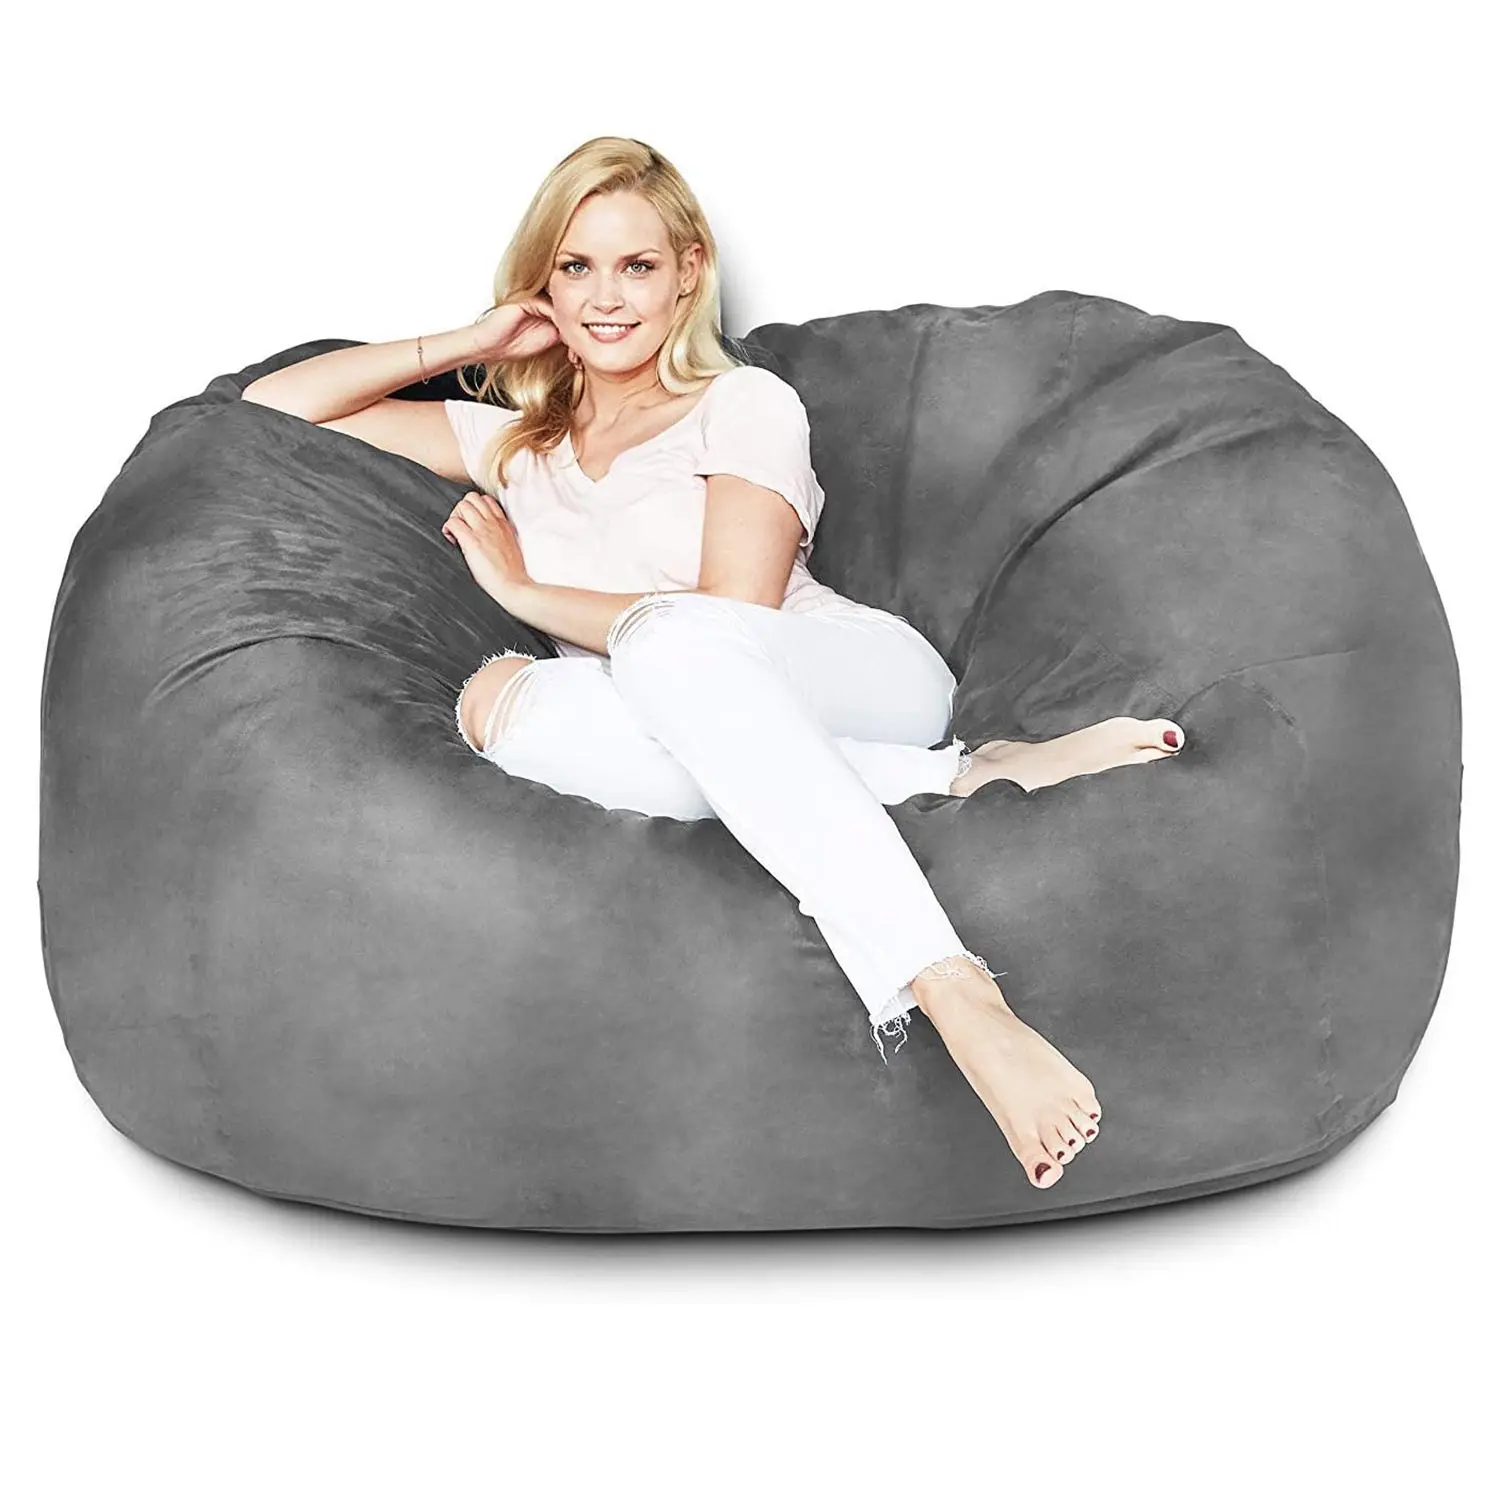 Kids Teenagers Adults Ultra Soft Foam Filling Washable Bean Bag Chair with Micro Suede Cover